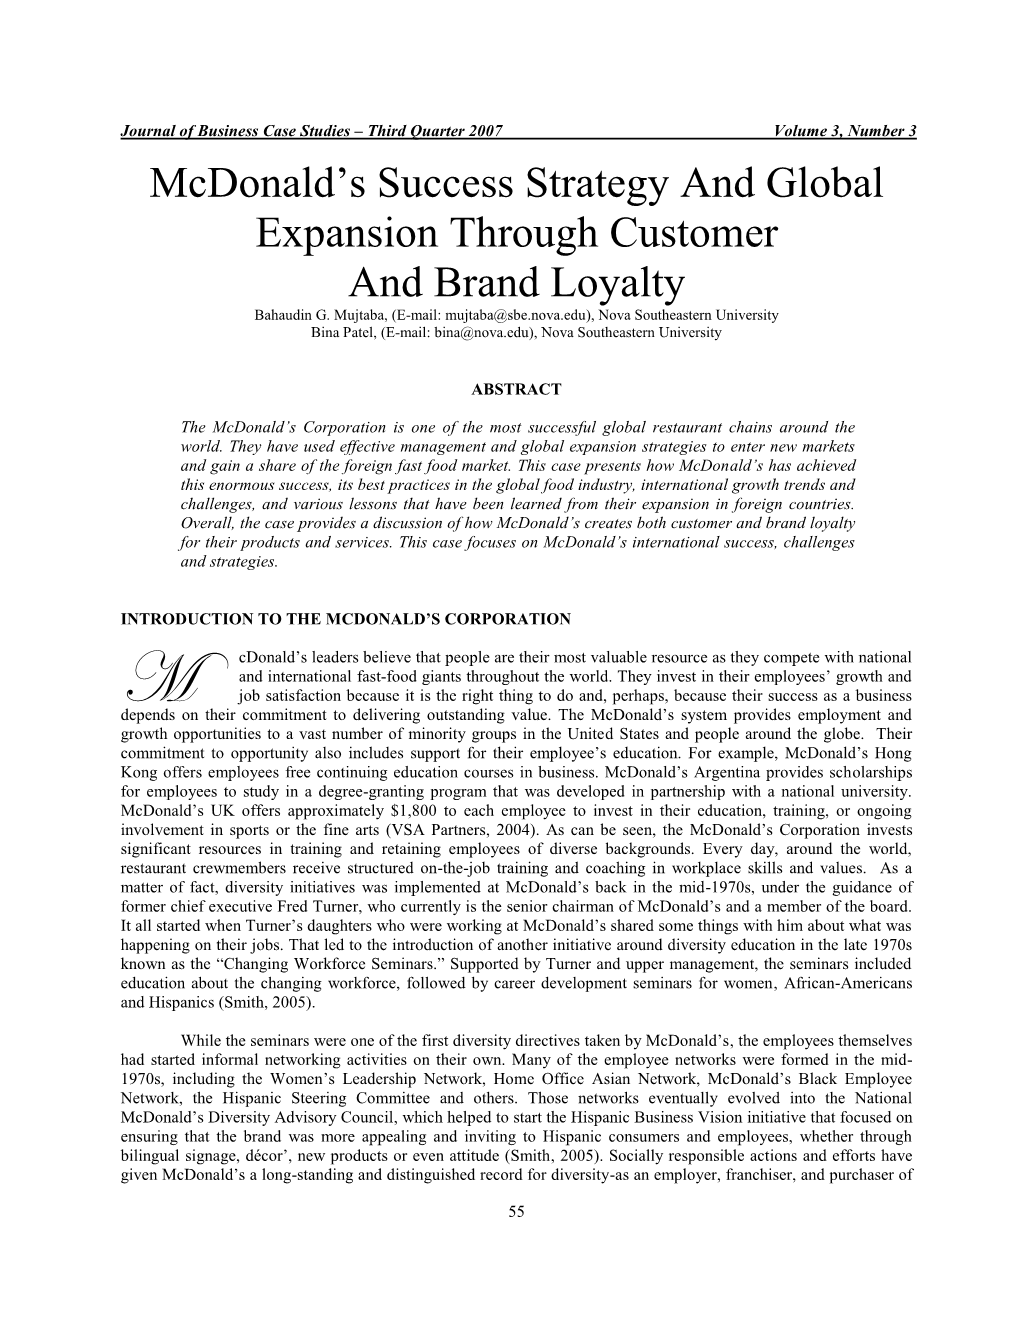 Mcdonald‟S Success Strategy and Global Expansion Through Customer and Brand Loyalty Bahaudin G